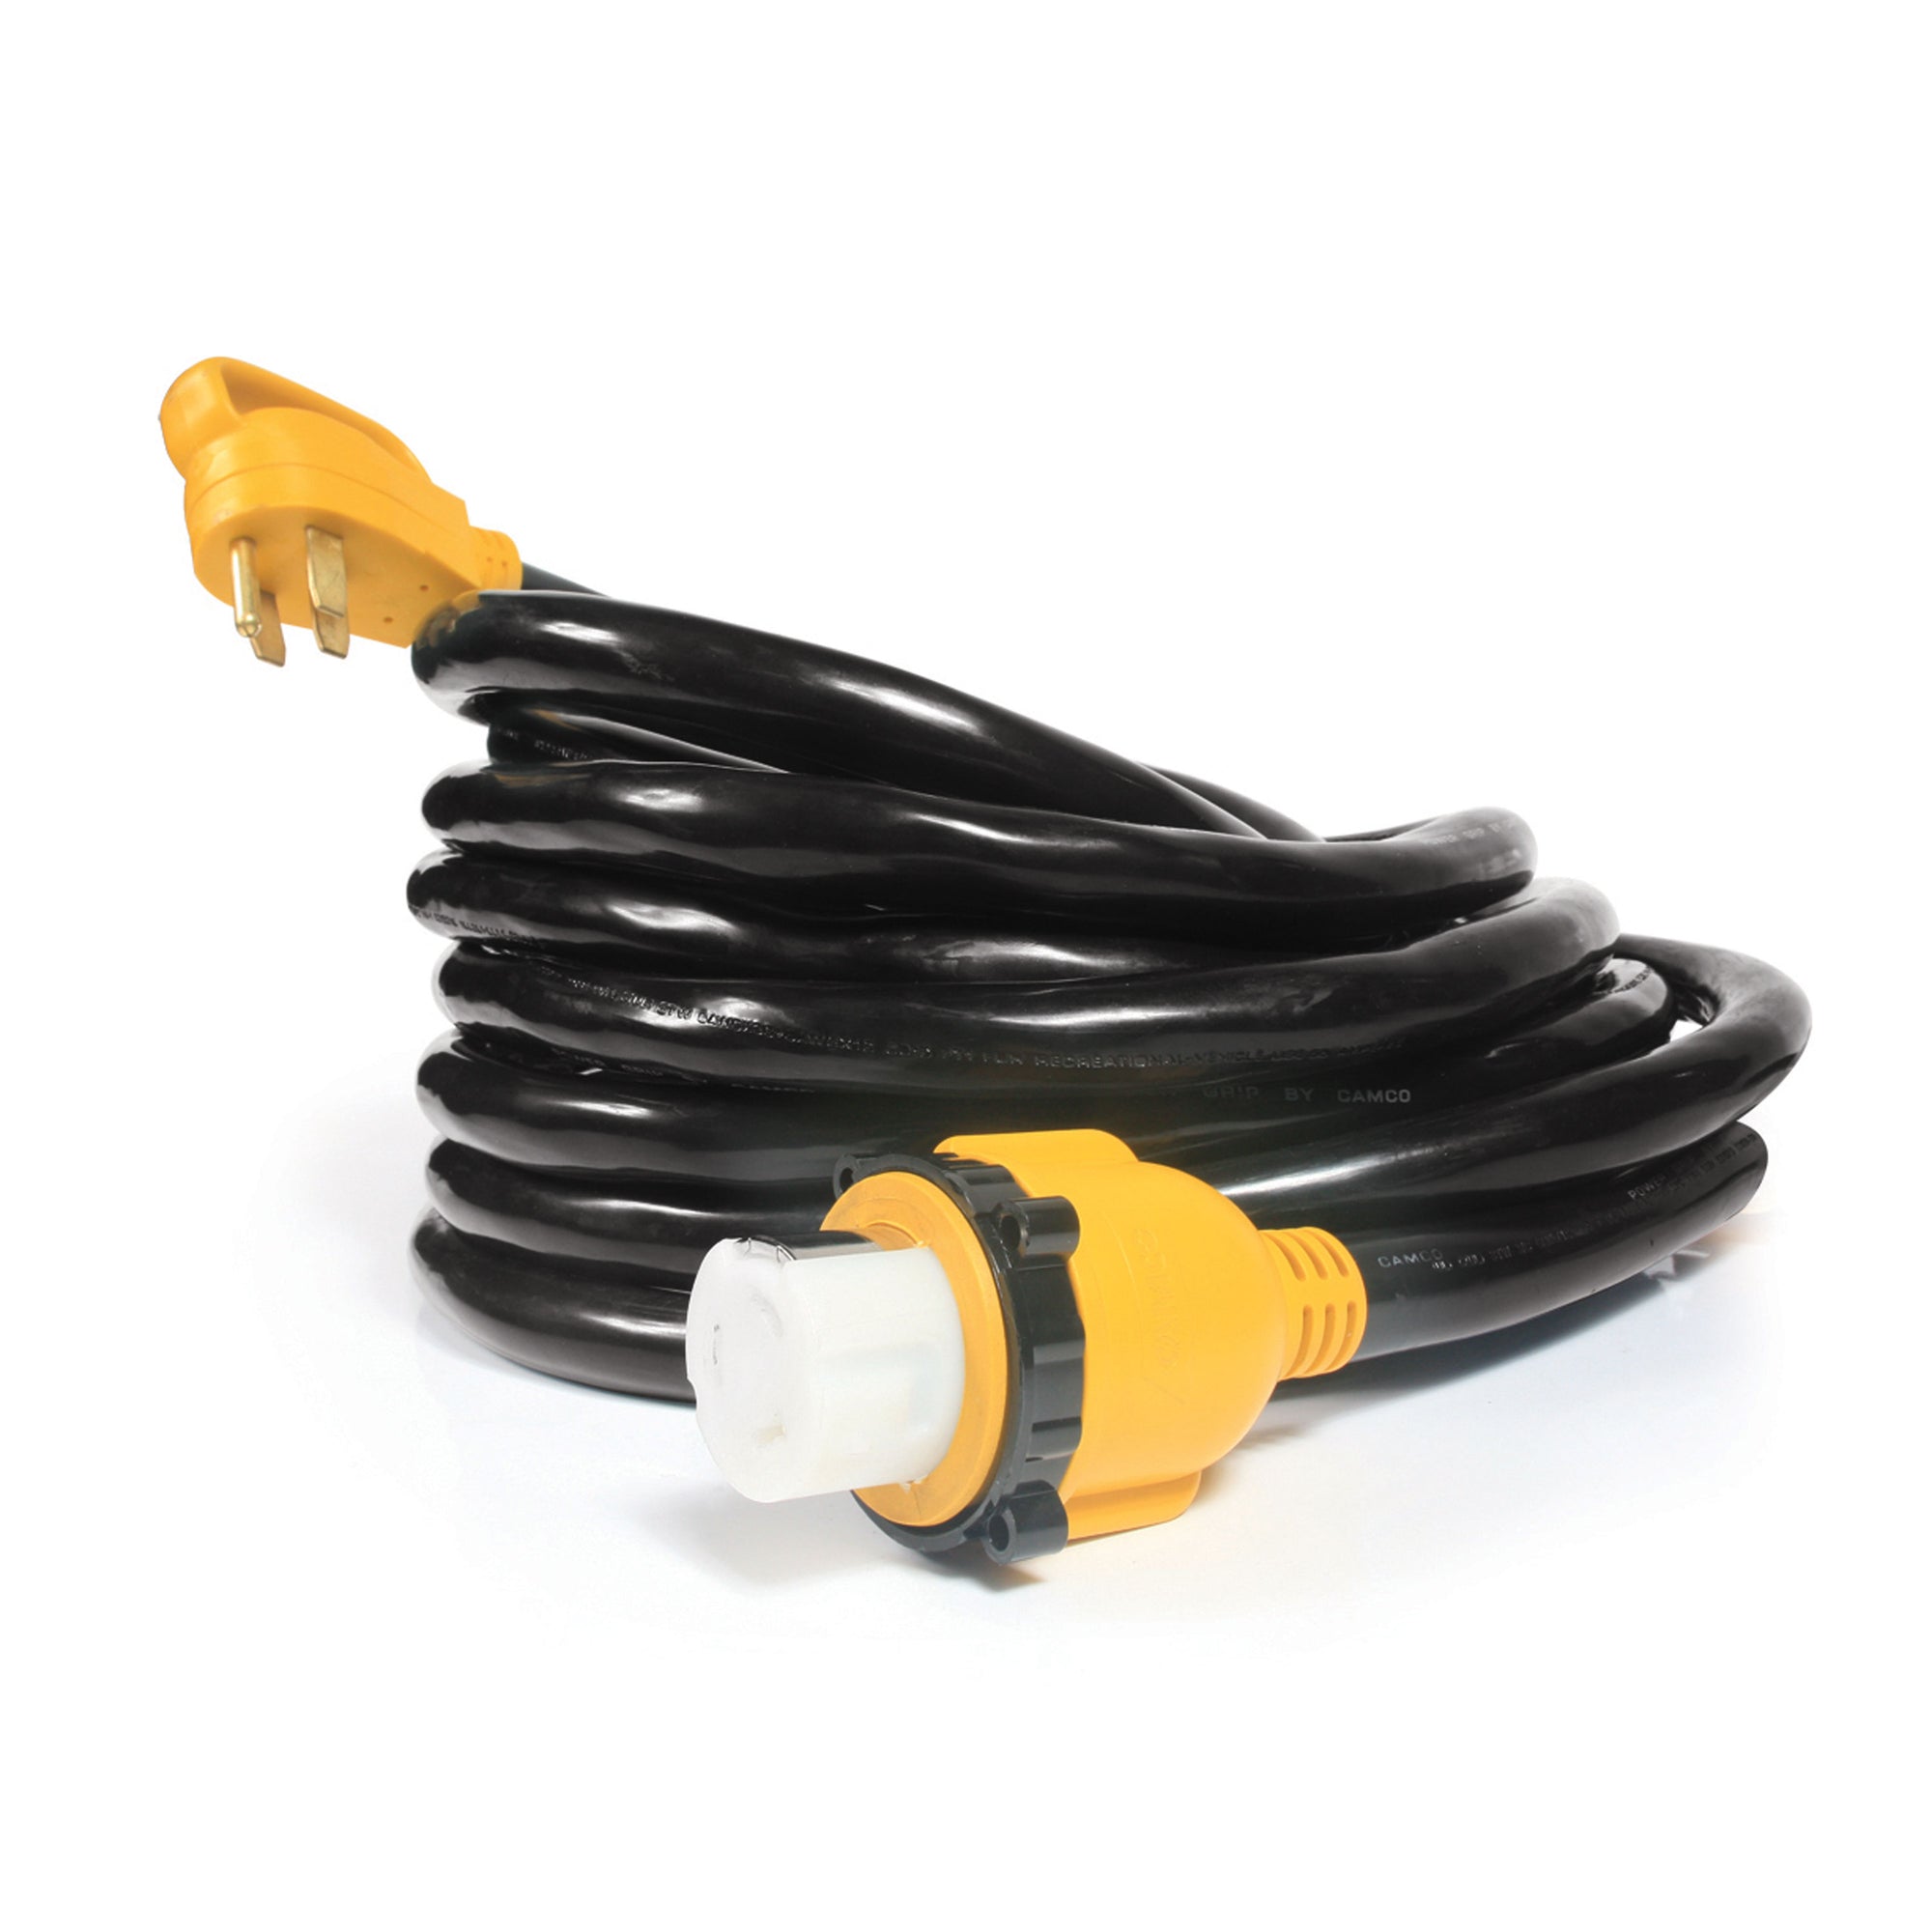 Camco 55542 50A Powergrip Locking Extension Cord - 25'